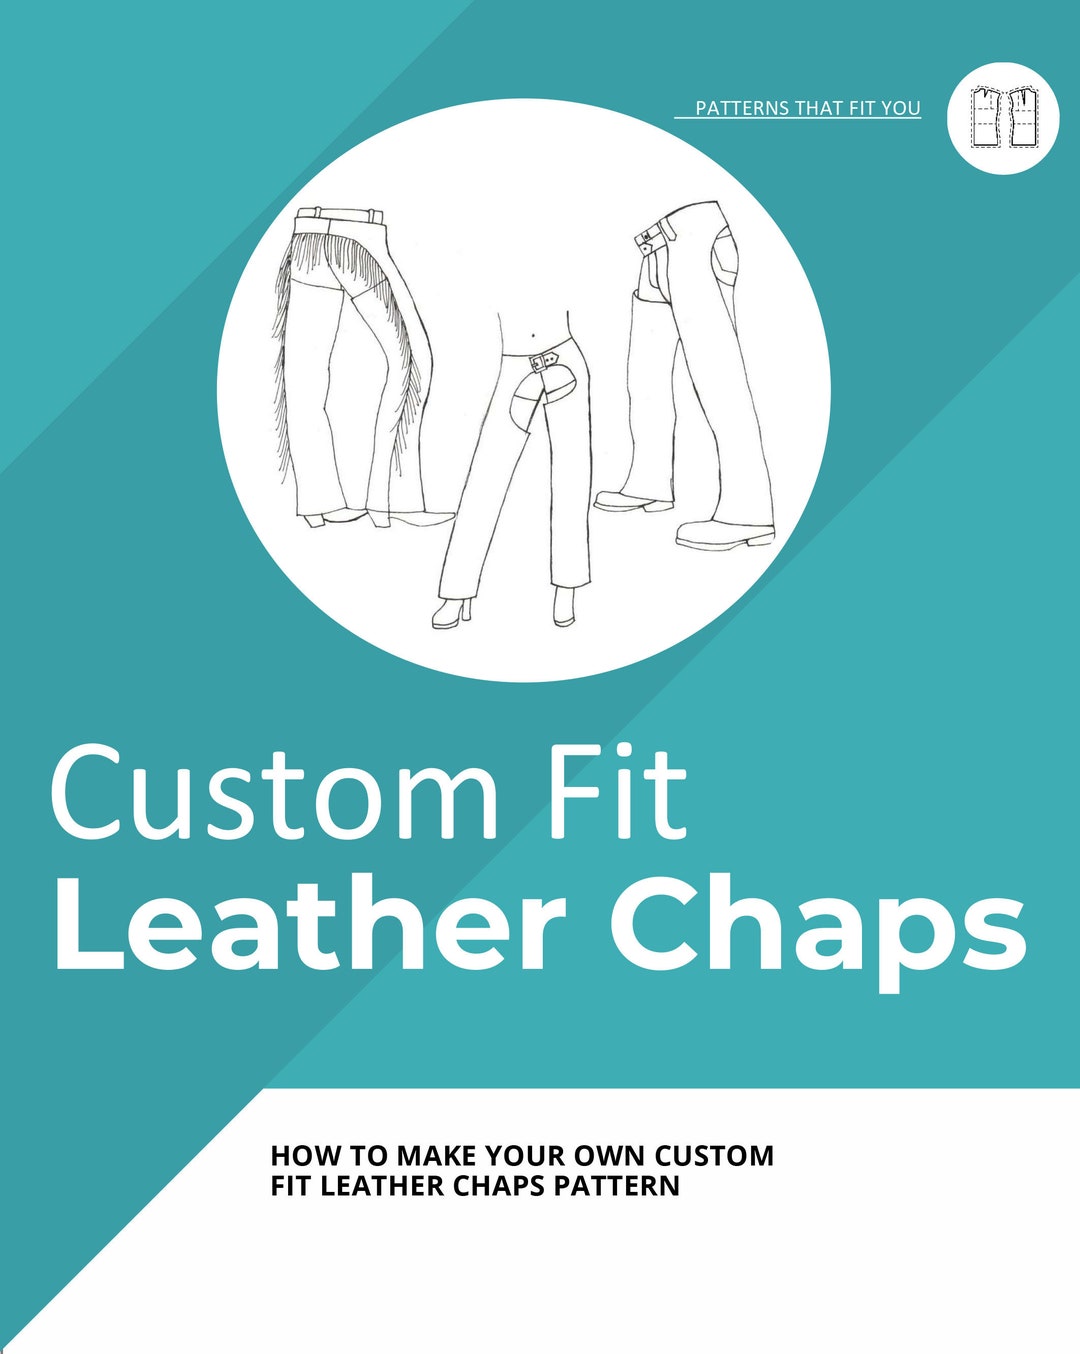 Custom Fit Leather Chaps Pattern Instructions - Etsy